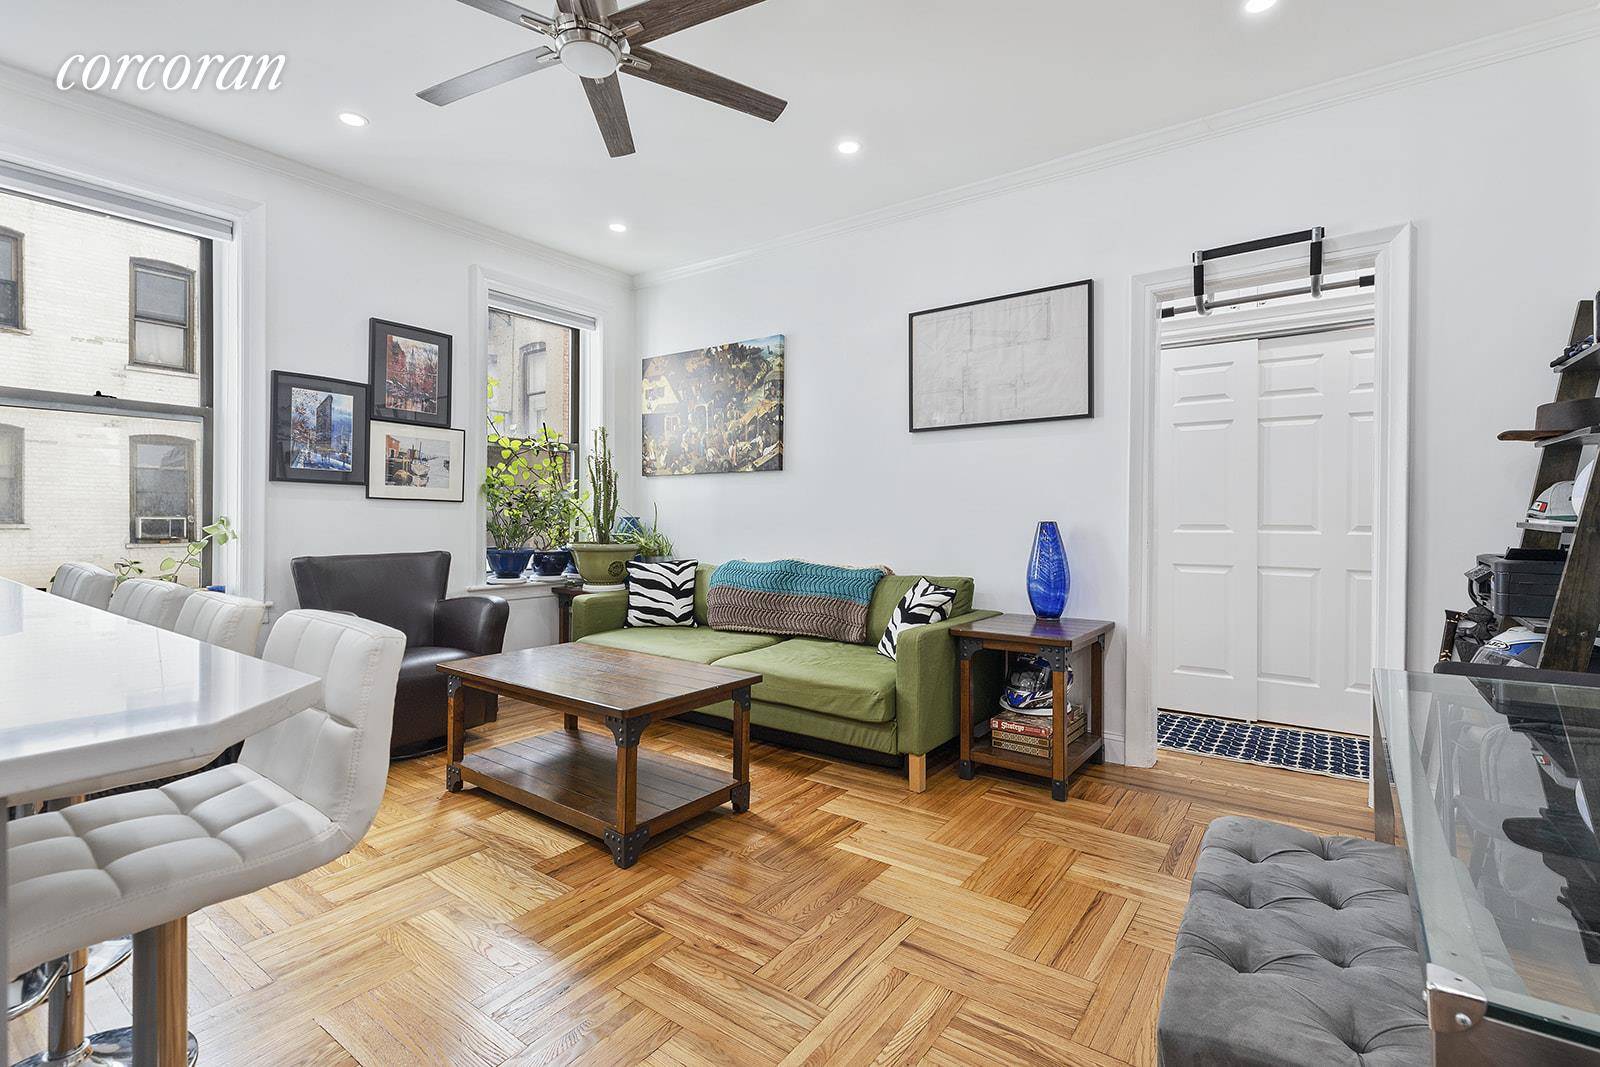 Move right into this charming and spacious, pre war one bedroom coop, perfectly located in the heart of Crown Heights, right in the historic sub section known as Weeksville.